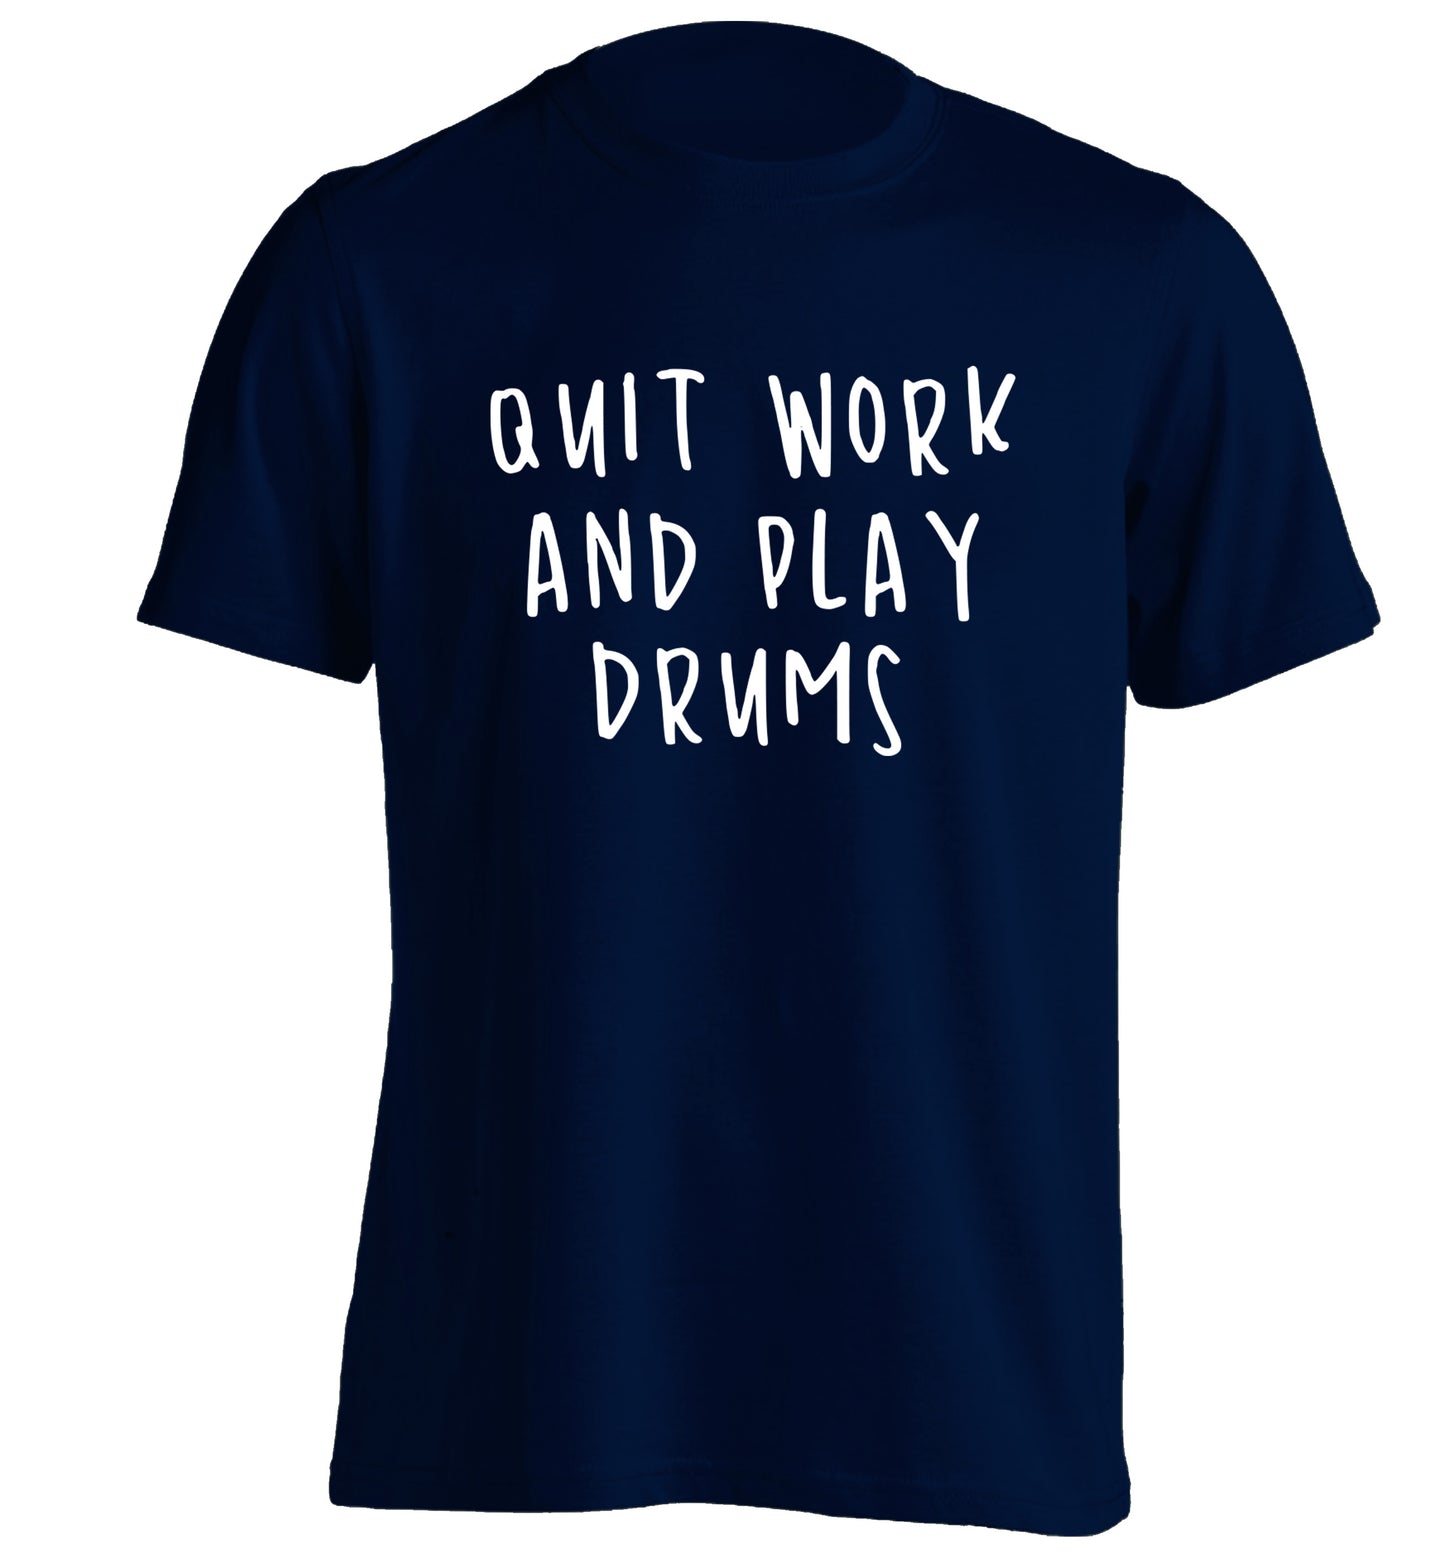 Quit work and play drums adults unisex navy Tshirt 2XL